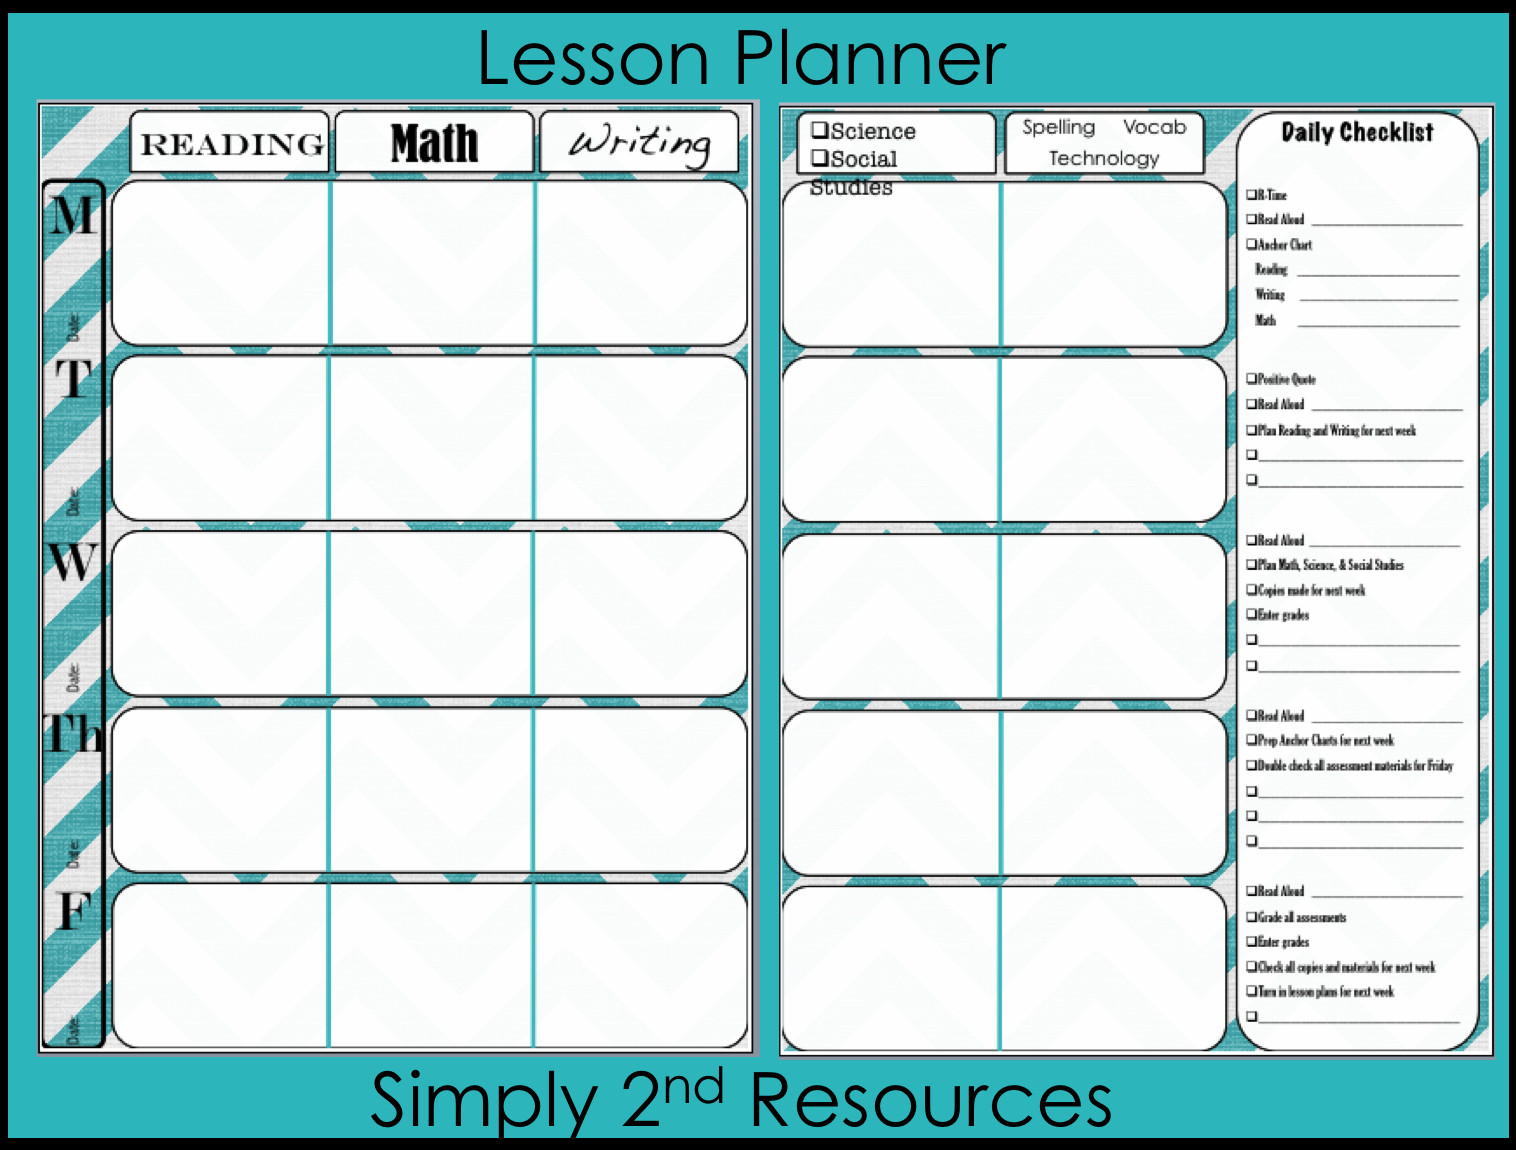 Free Printable Lesson Plan Template Simply 2nd Resources Lesson Plan Template so Excited to